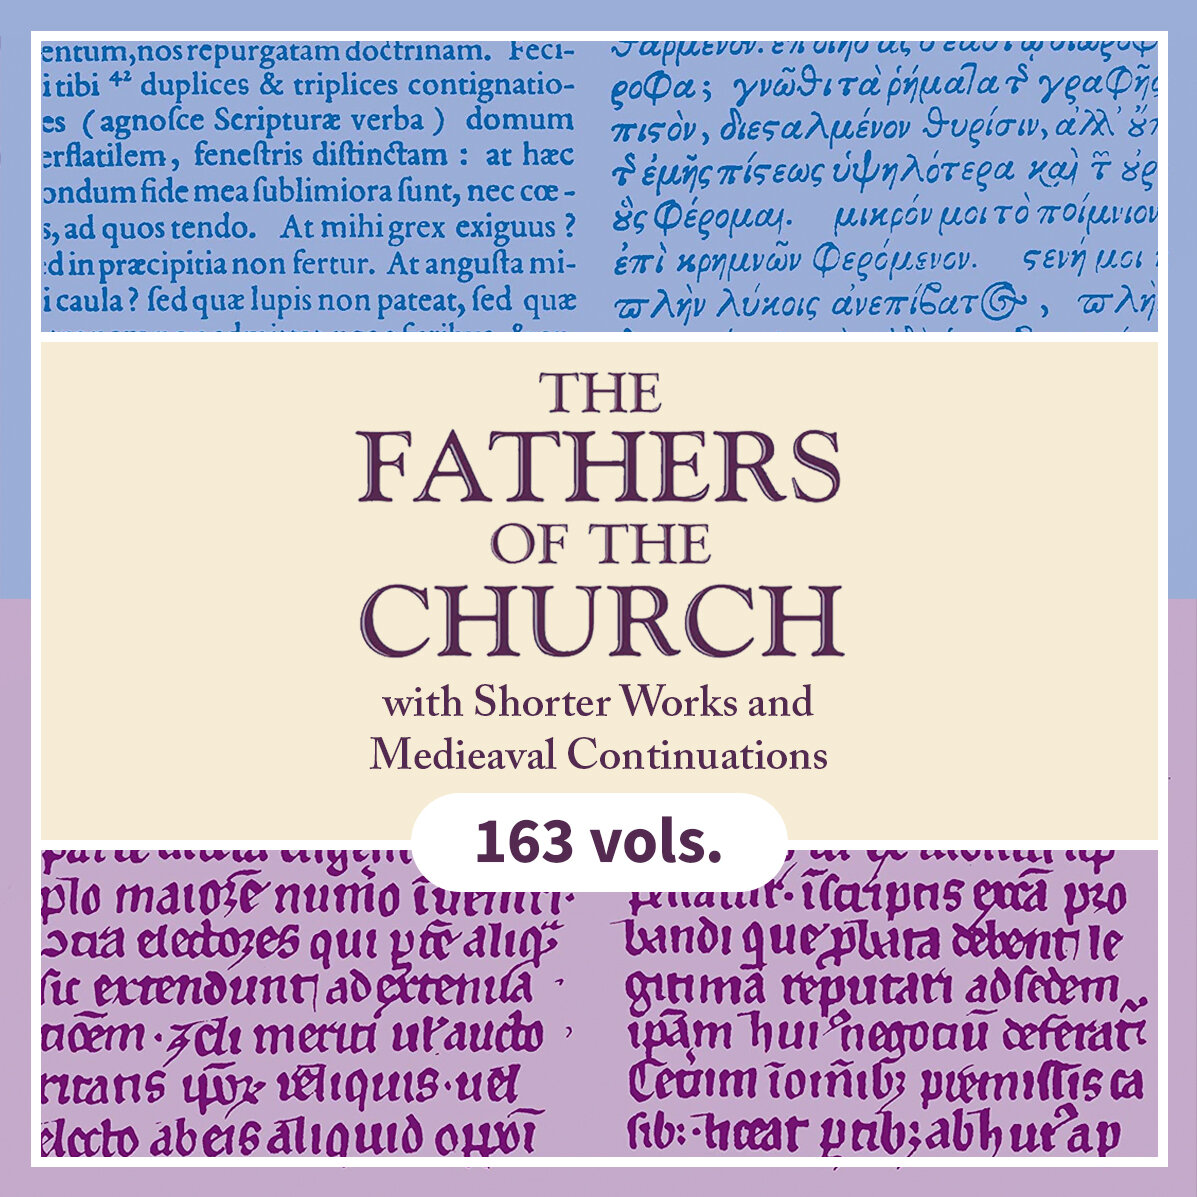 The Fathers of the Church with Shorter Works and Medieval Continuations (163 Vols.)